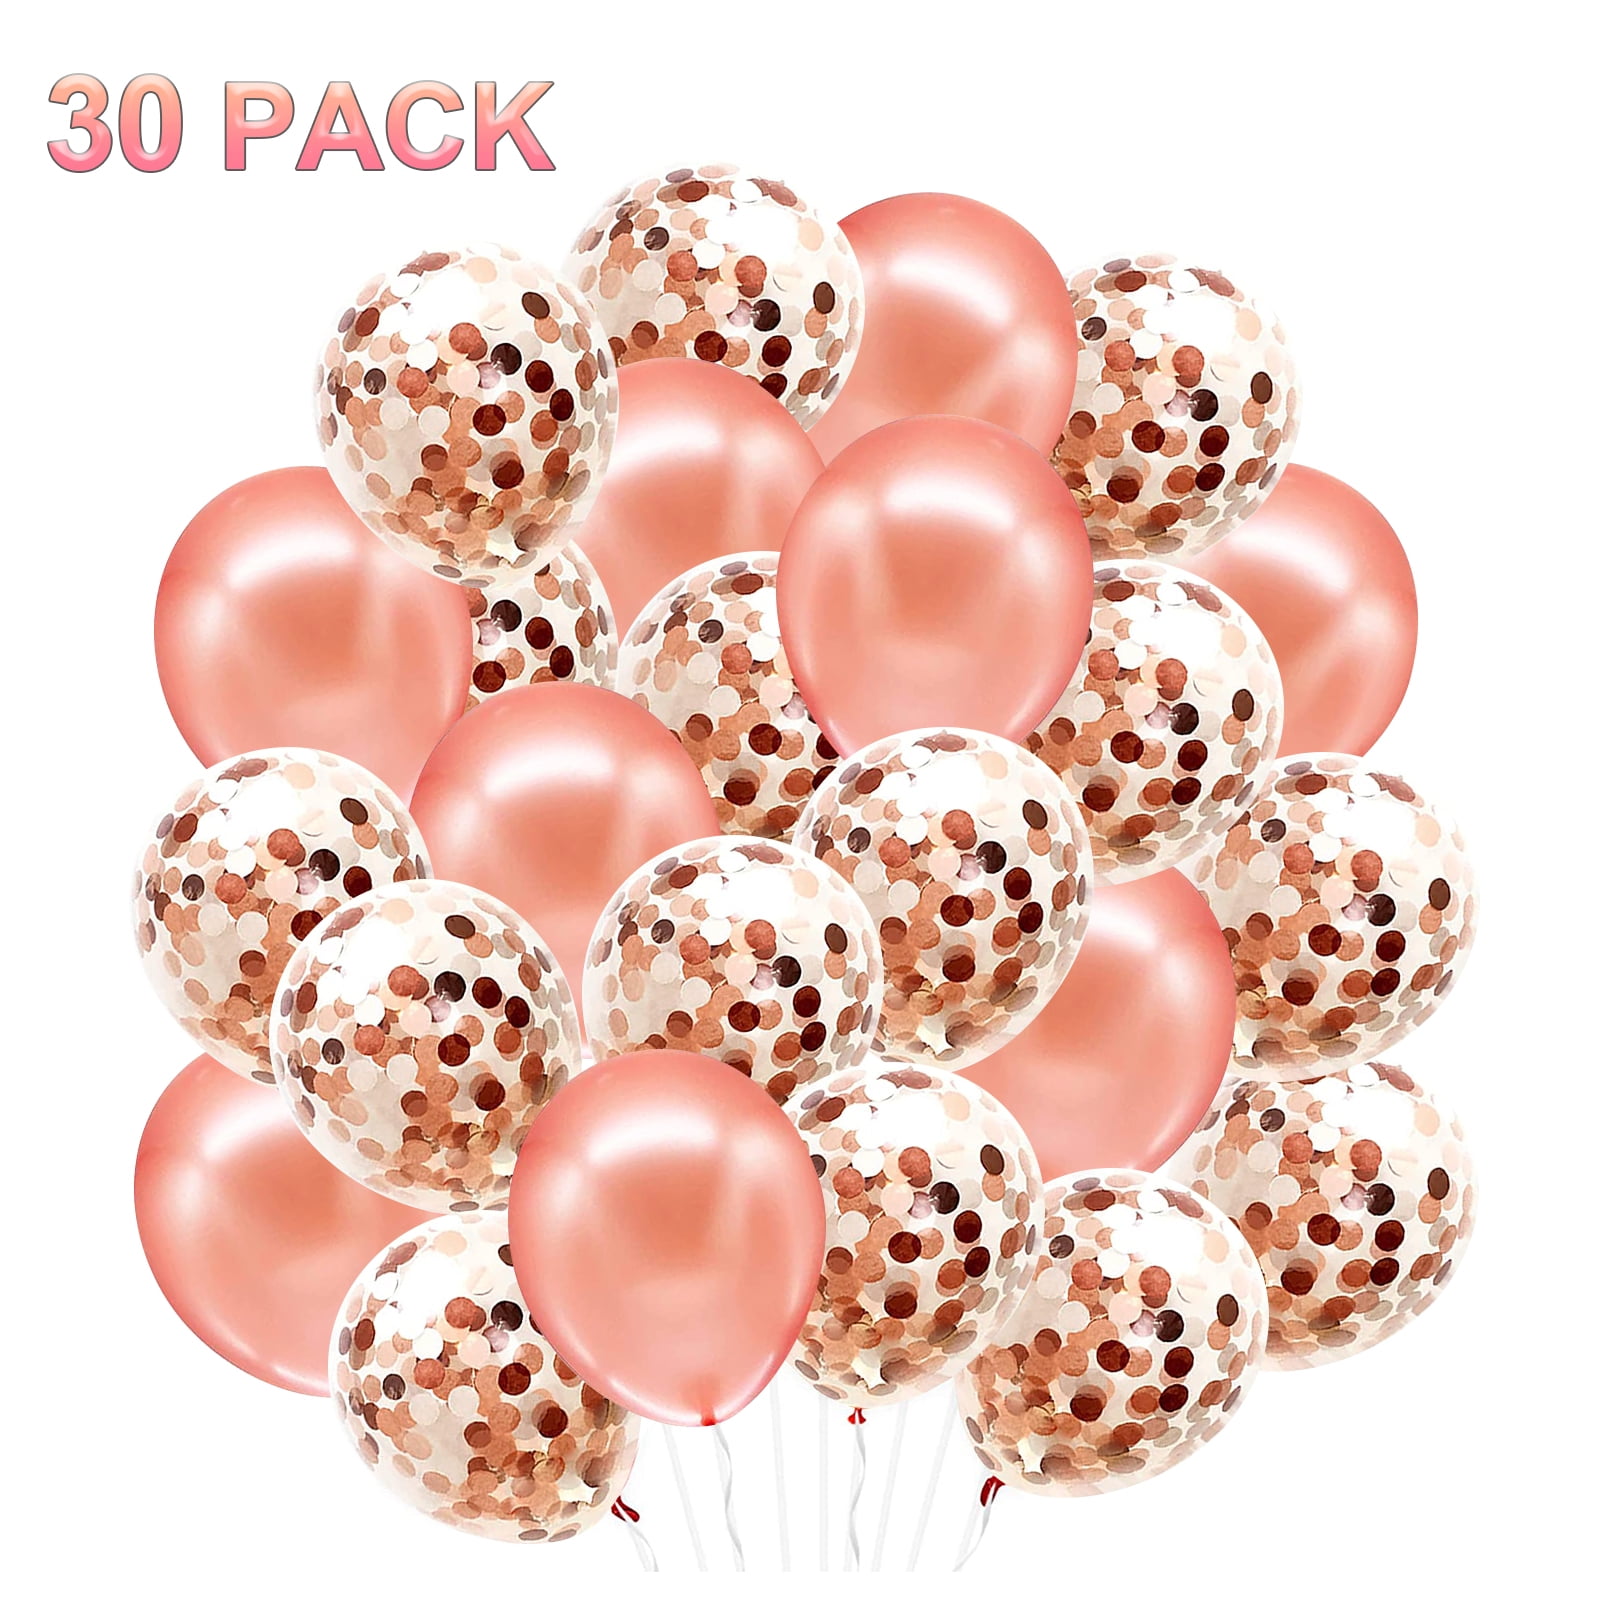 Balloons 'Happy Birthday' Pink-Gold 33cm - 12 pieces